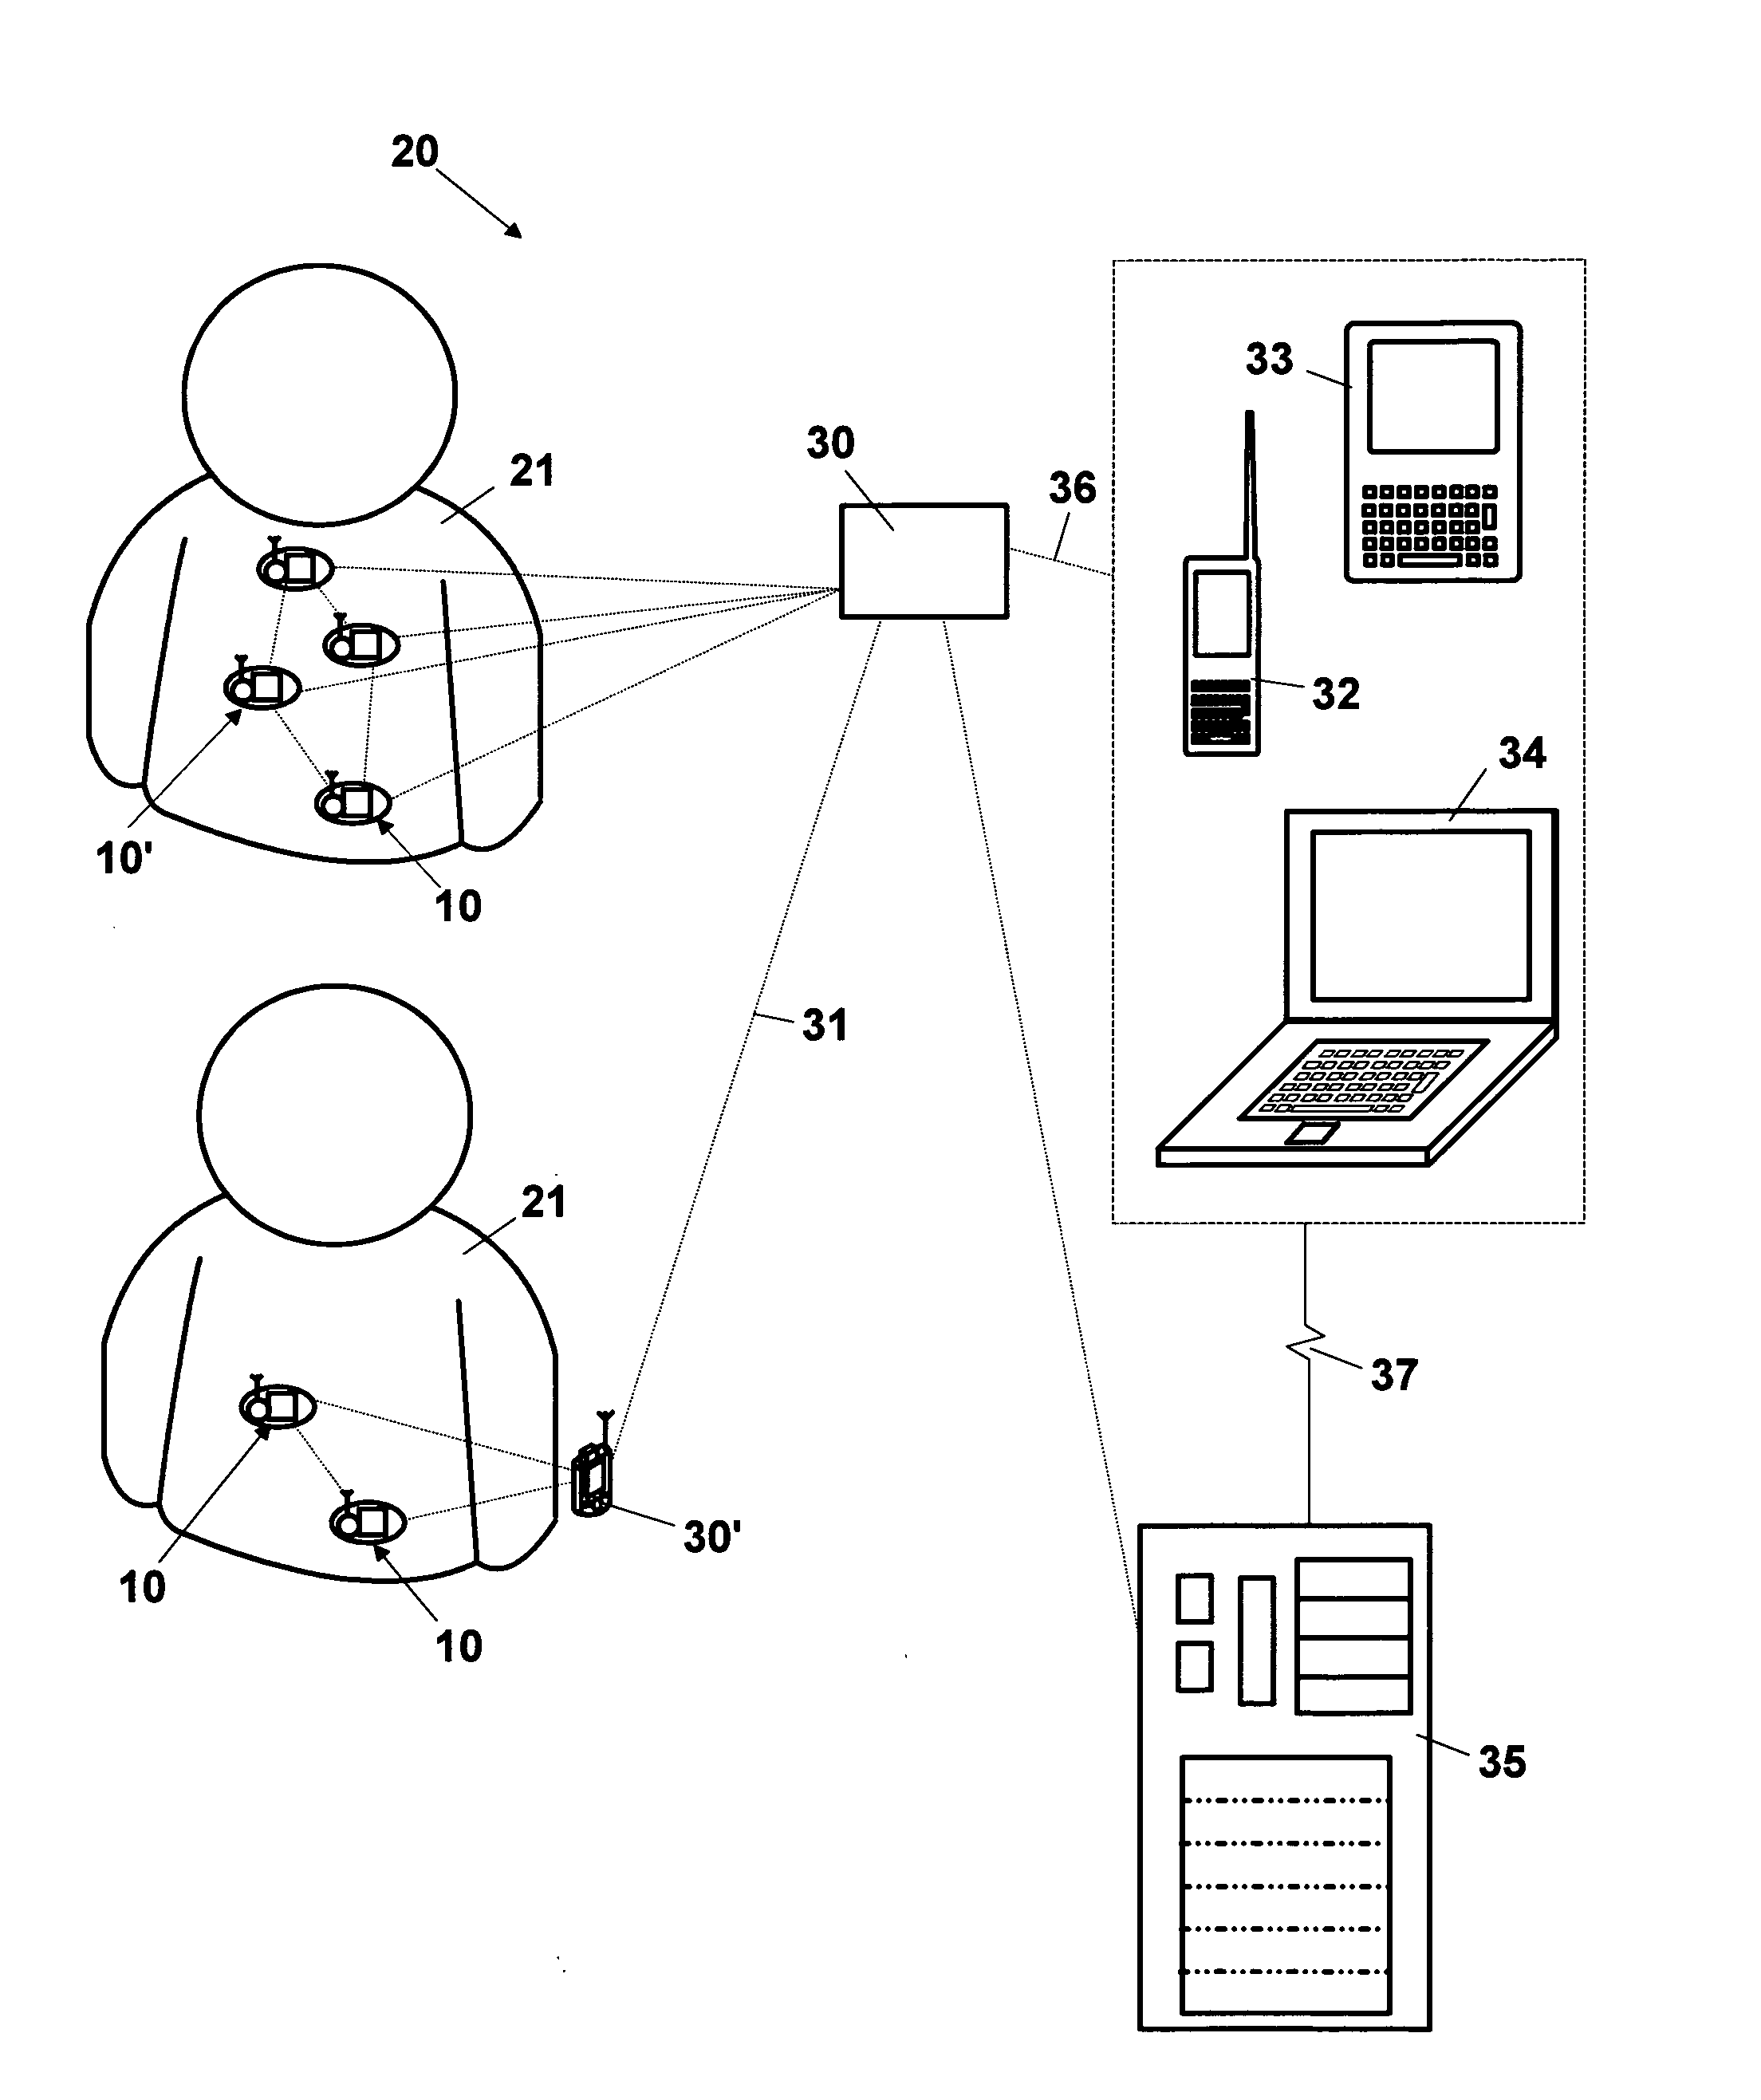 Support device for sensors and/or actuators that can be part of a wireless network of sensors/actuators